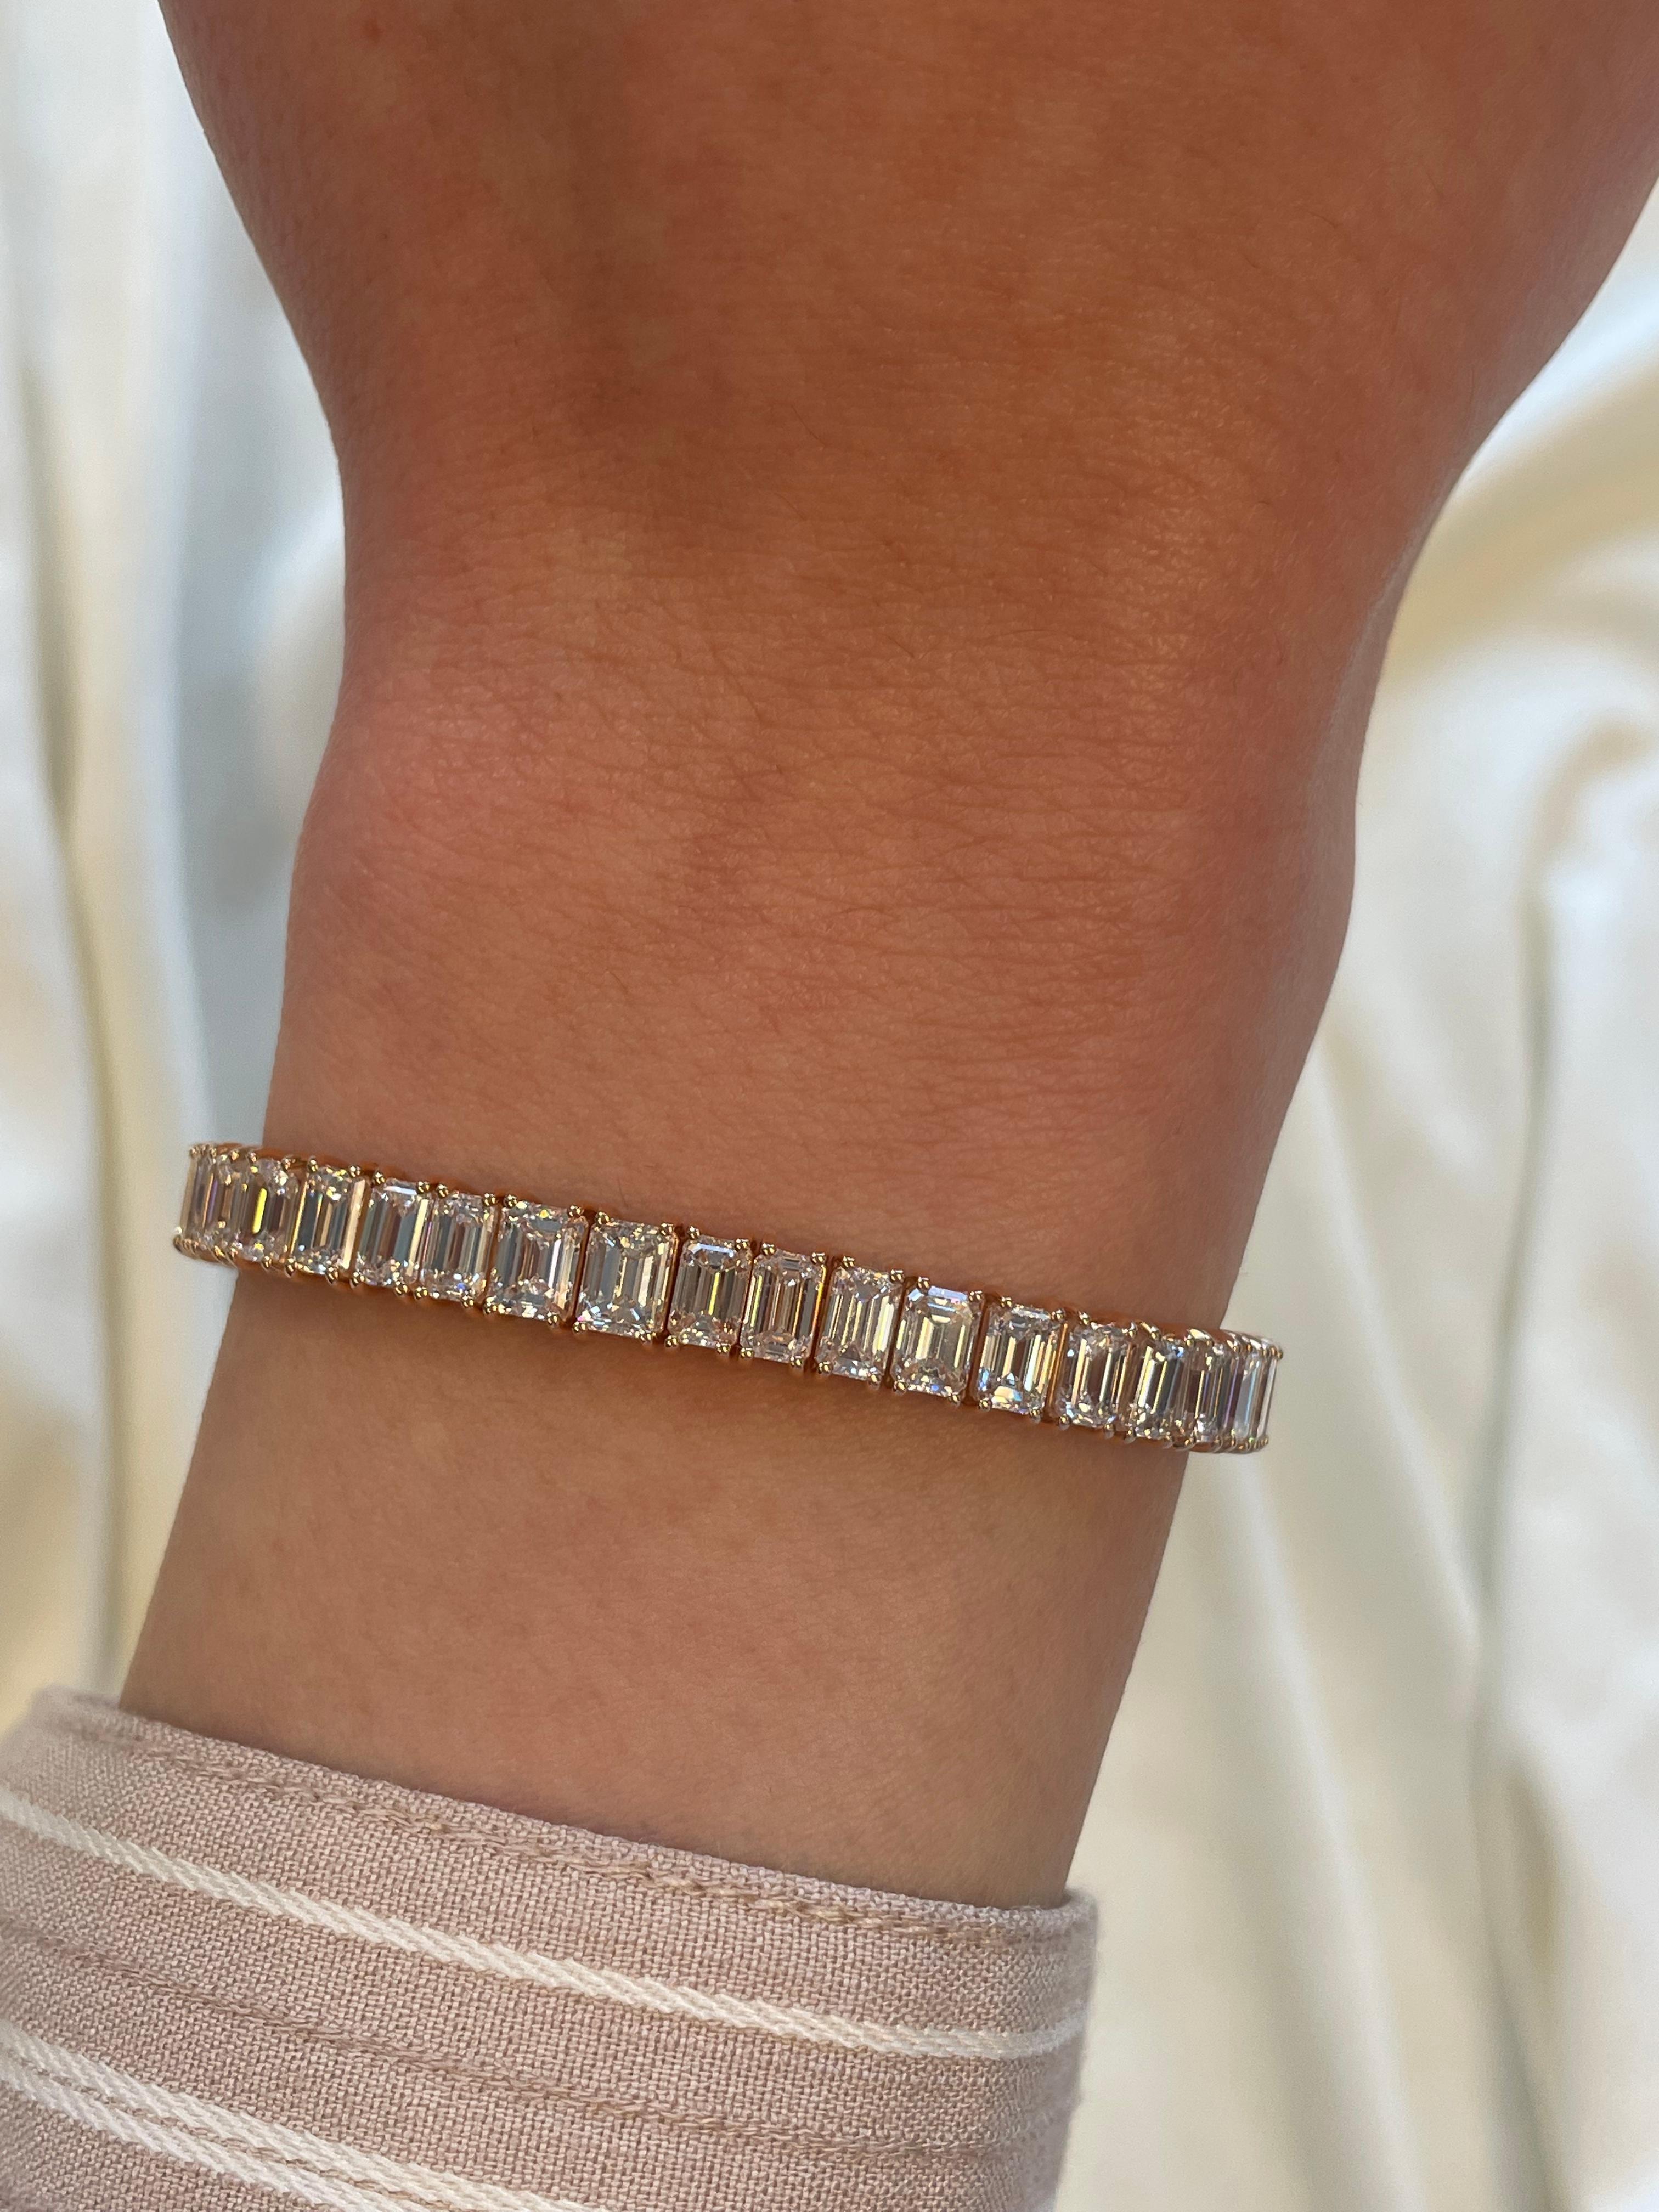 Stunning modern straight emerald cut diamond tennis bracelet. High jewelry by Alexander Beverly Hills.
51 emerald cut diamonds, 17.32 carats (apx 0.33ct each). Approximately H/I color and VVS-VS clarity. 18k rose gold, 19.48 grams.
Accommodated with